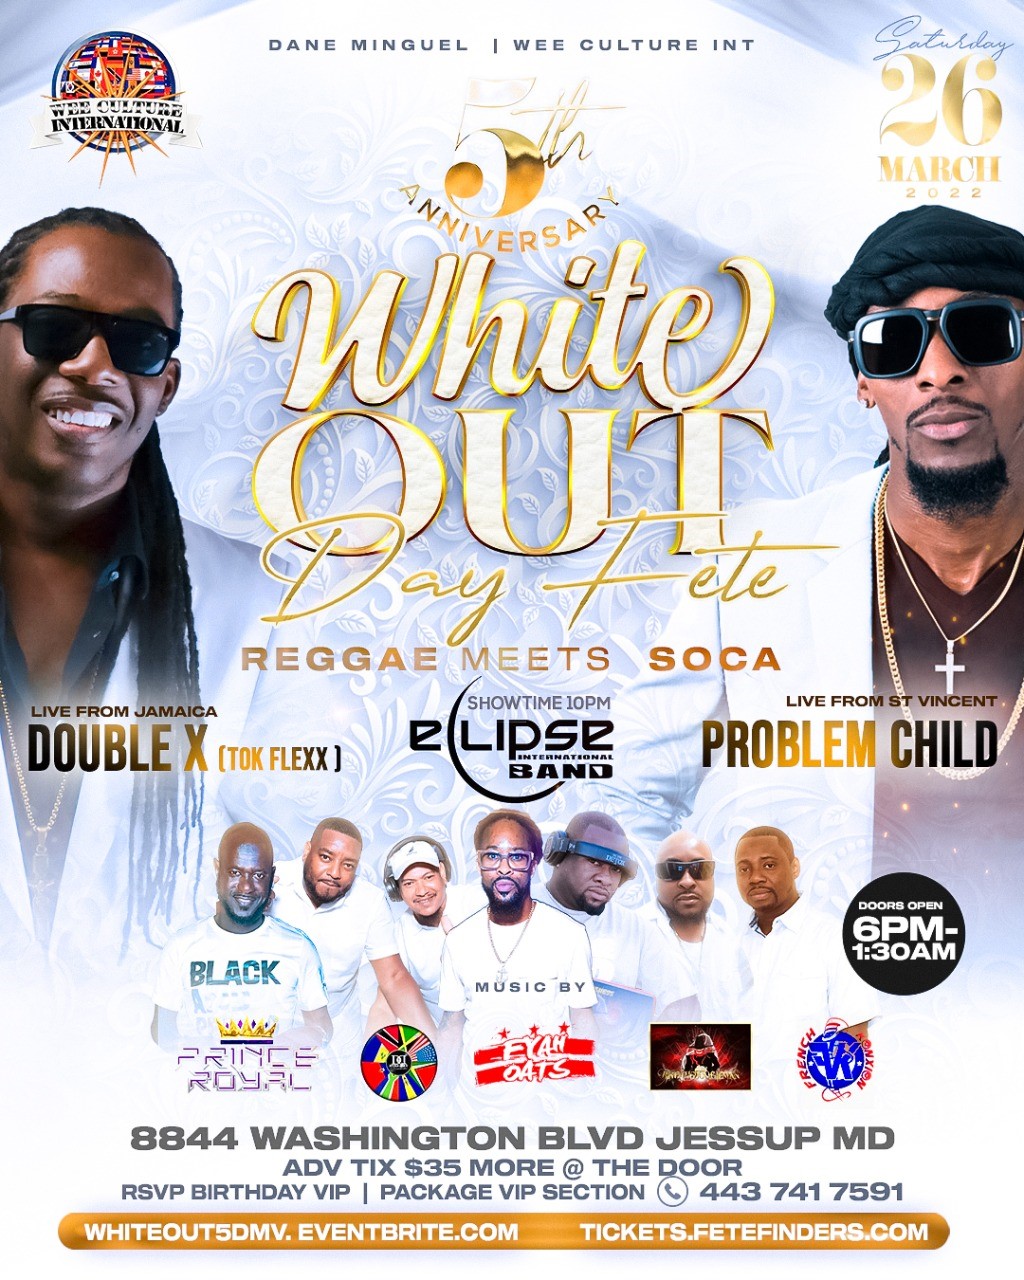 WHITE OUT 5 REGGAE MEETS SOCA on mar. 26, 21:00@8844 Washington Blvd Jessup, MD - Buy tickets and Get information on www.fetefinders.com tickets.fetefinders.com